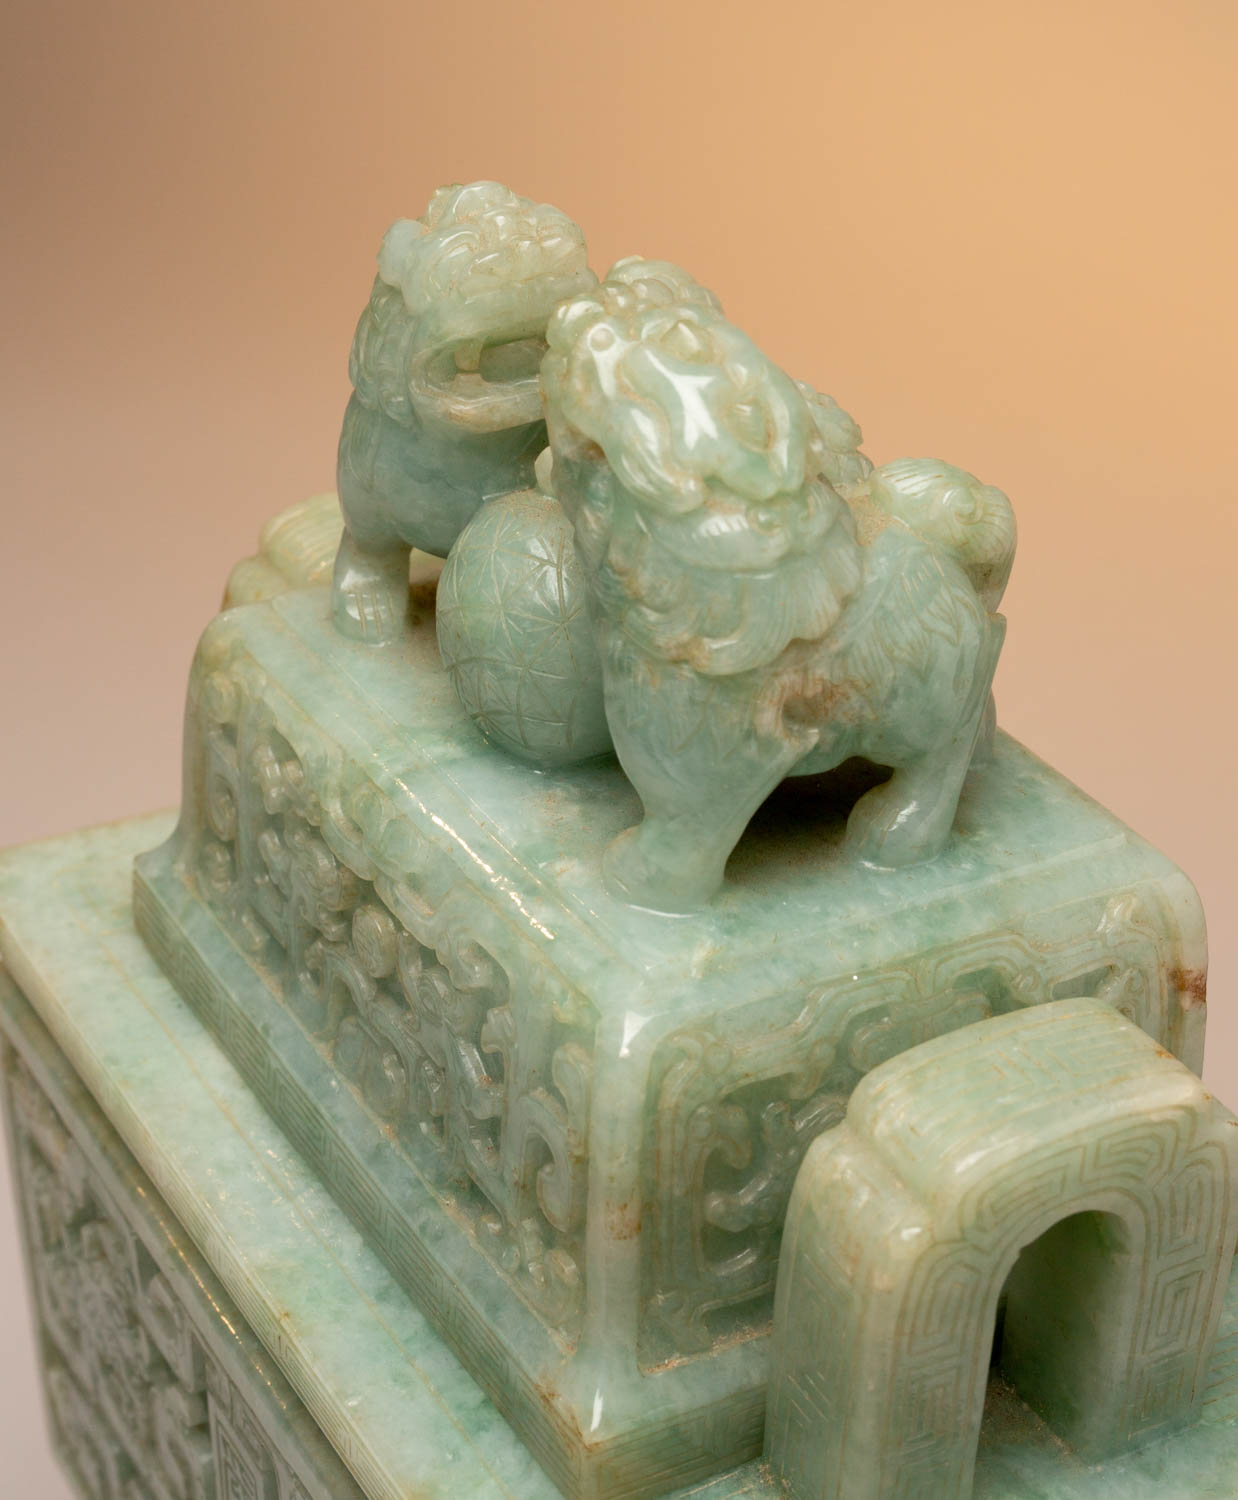 A MASSIVE CHINESE JADEITE ARCHAISTIC INCENSE BURNER AND COVER, FANGDING LATE QING DYNASTY/REPUBLIC - Image 2 of 5